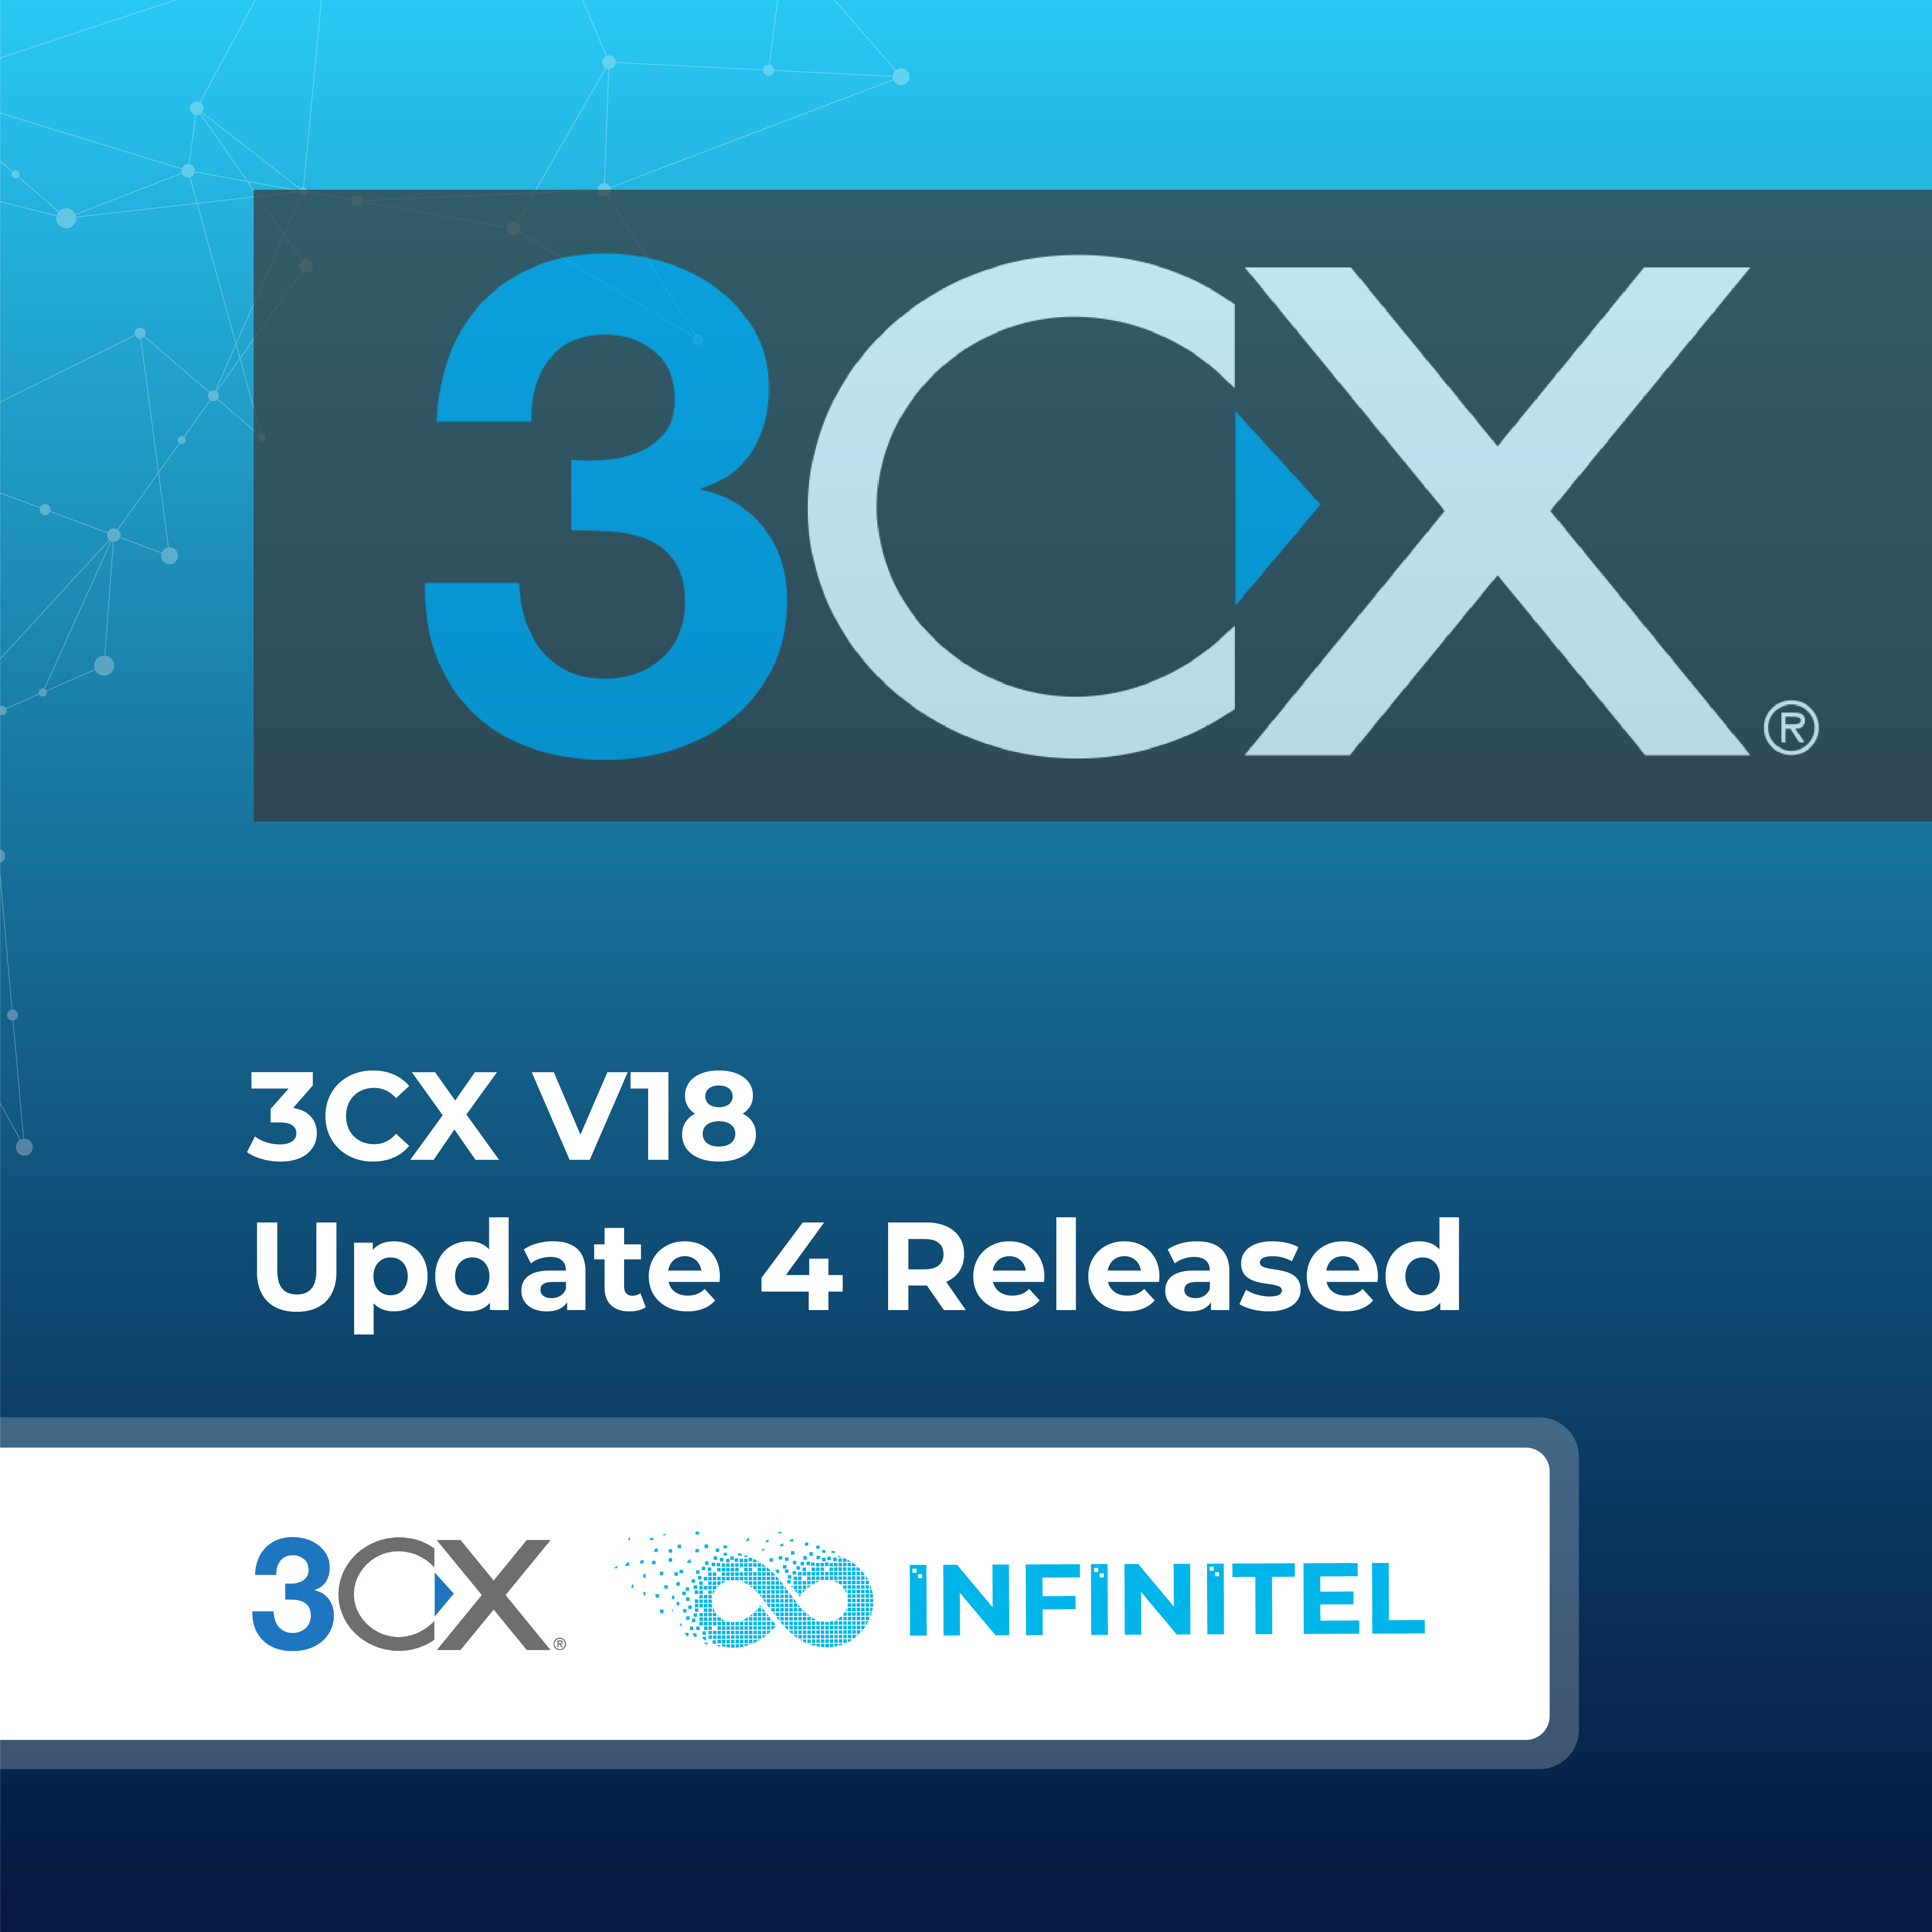 3CX V18 Update 4 Released